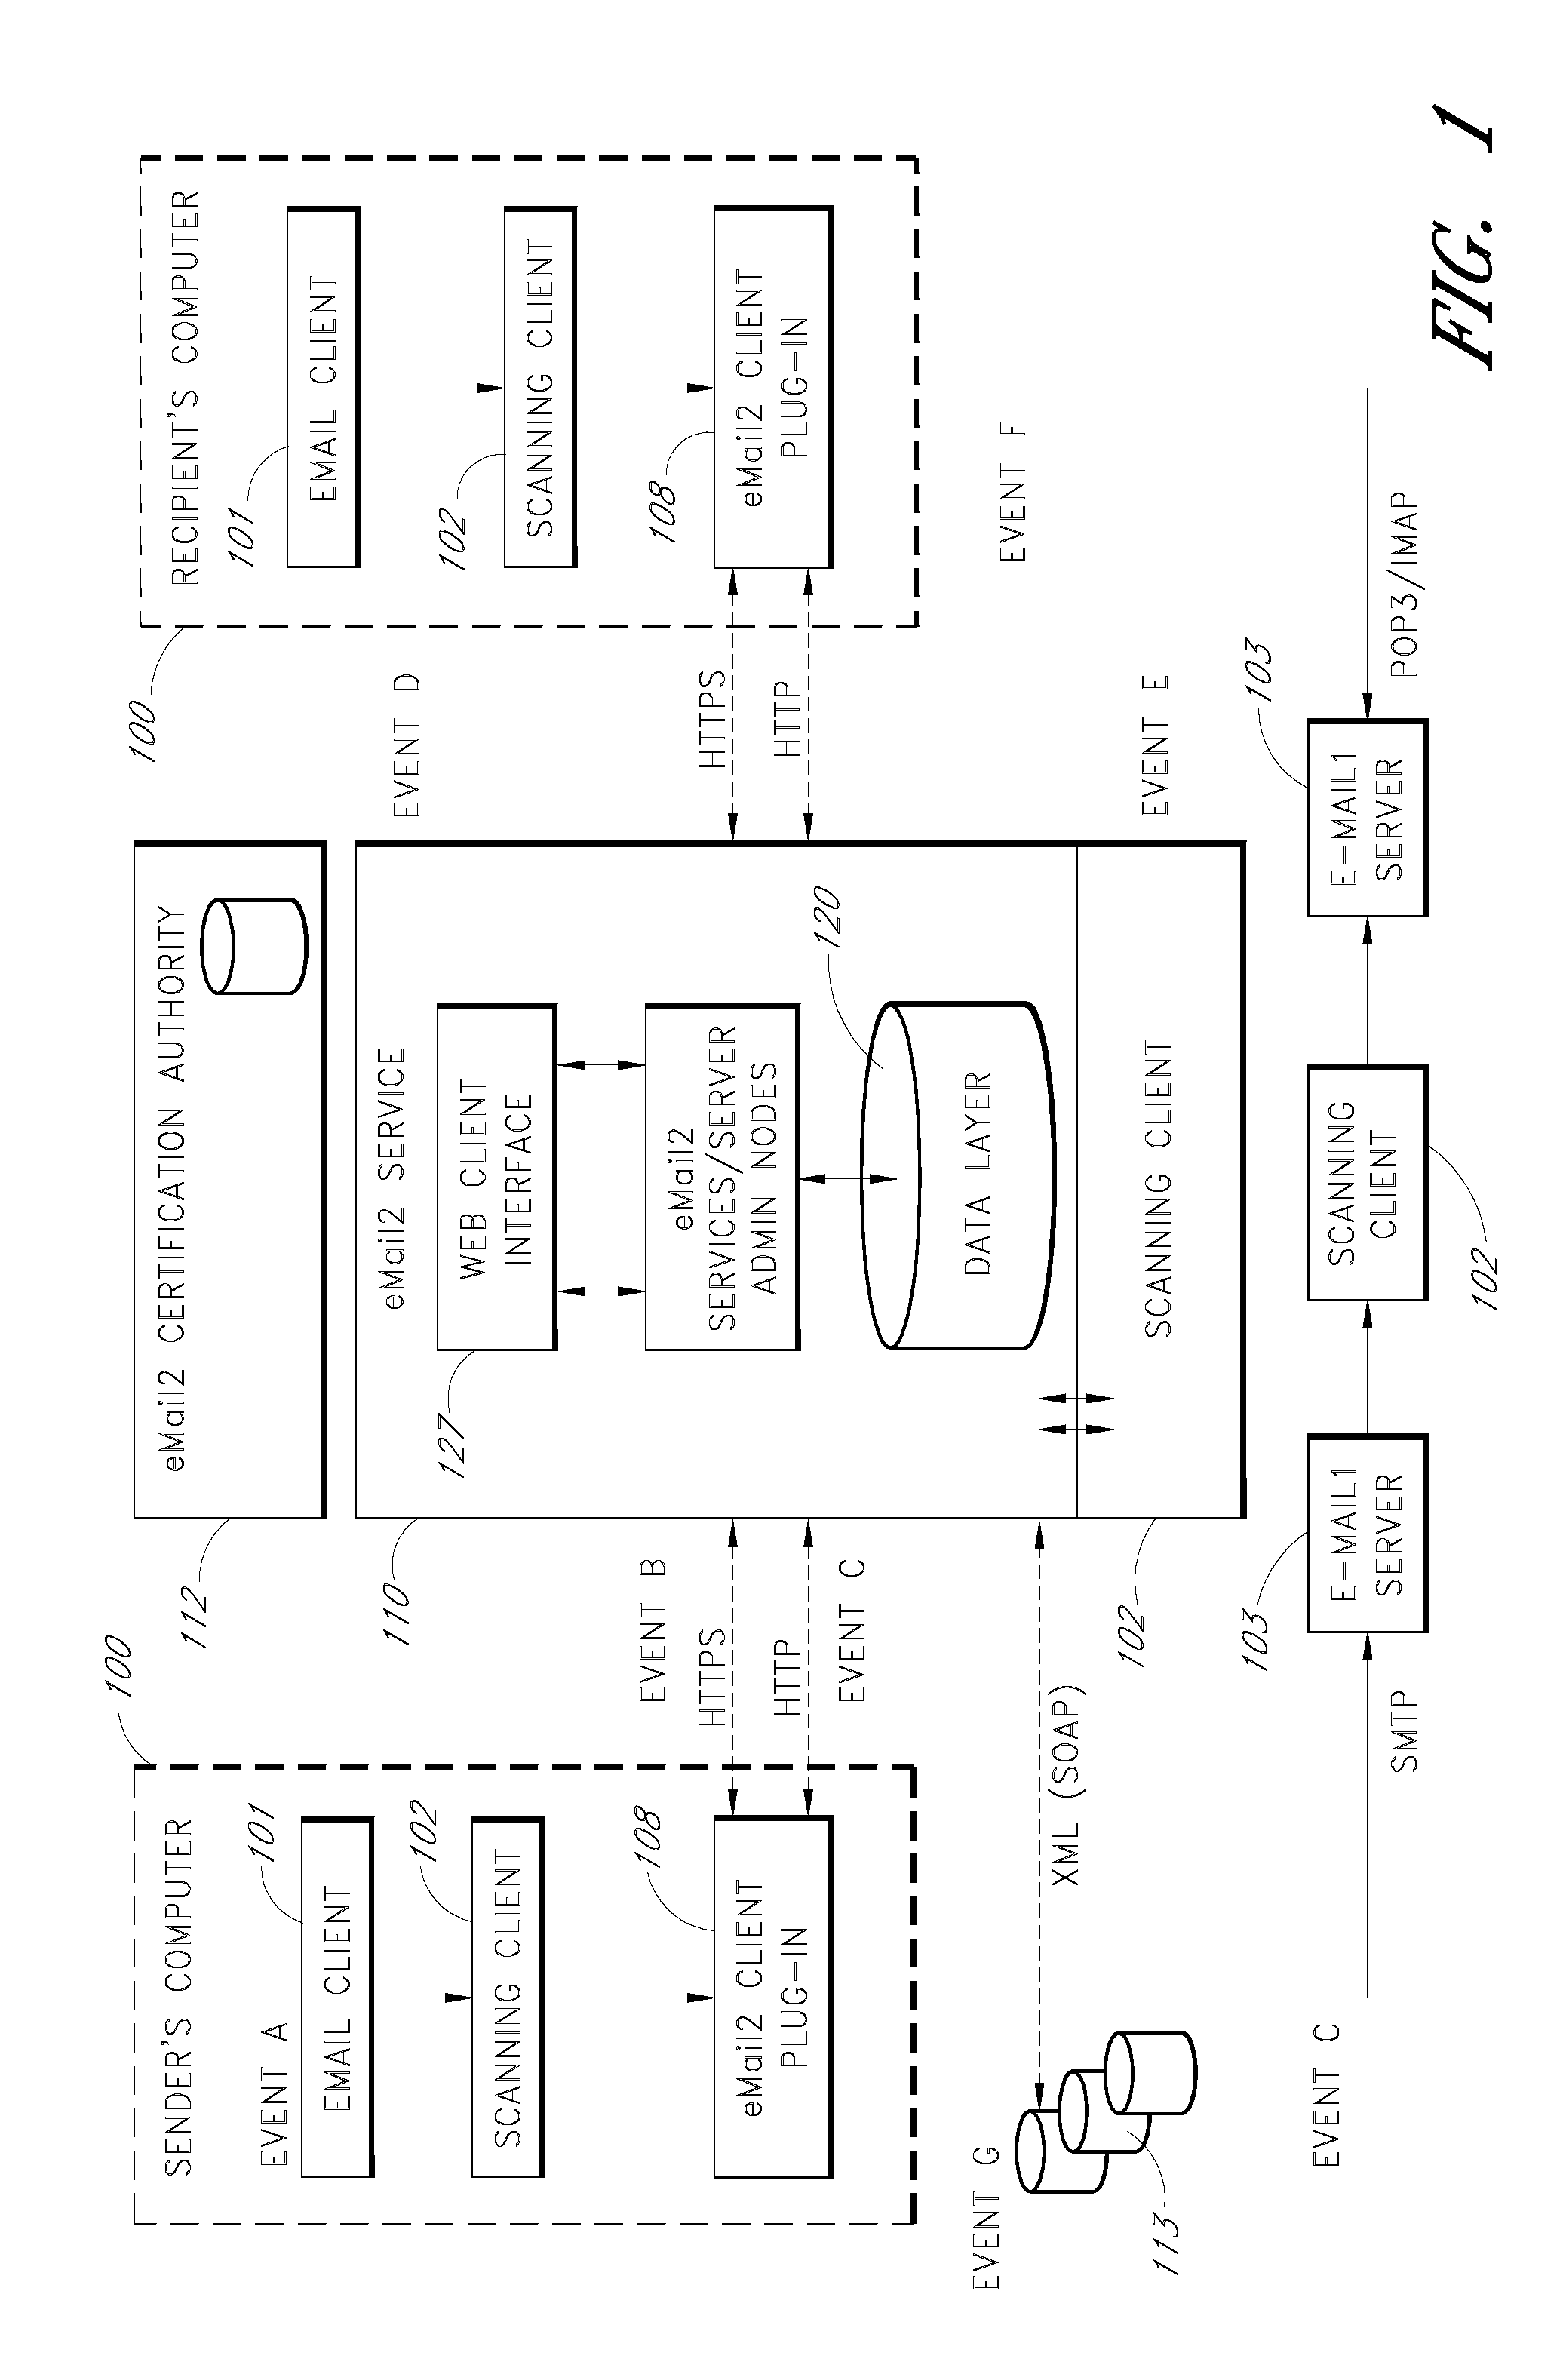 Electronic mail system with aggregation and integrated display of related messages